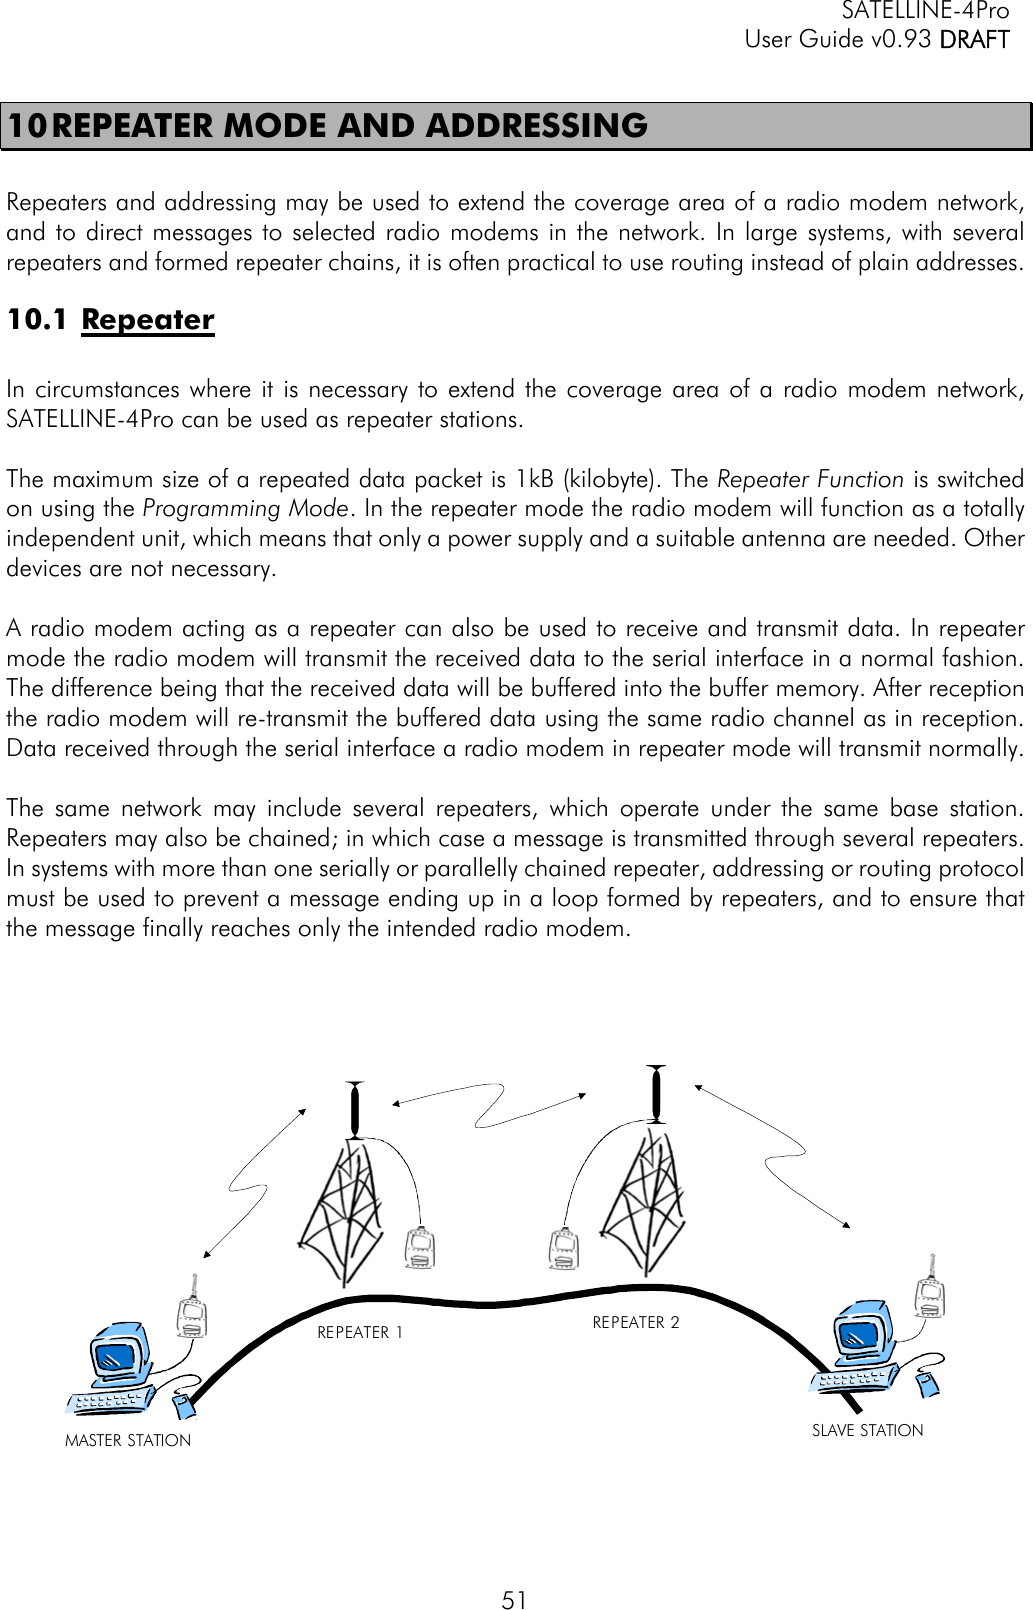   SATELLINE-4Pro   User Guide v0.93 DRAFT 51 10 REPEATER MODE AND ADDRESSING  Repeaters and addressing may be used to extend the coverage area of a radio modem network, and to direct messages to selected radio modems in the network. In large systems, with several repeaters and formed repeater chains, it is often practical to use routing instead of plain addresses. 10.1 Repeater  In circumstances where it is necessary to extend the coverage area of a radio modem network, SATELLINE-4Pro can be used as repeater stations.  The maximum size of a repeated data packet is 1kB (kilobyte). The Repeater Function is switched on using the Programming Mode. In the repeater mode the radio modem will function as a totally independent unit, which means that only a power supply and a suitable antenna are needed. Other devices are not necessary.   A radio modem acting as a repeater can also be used to receive and transmit data. In repeater mode the radio modem will transmit the received data to the serial interface in a normal fashion. The difference being that the received data will be buffered into the buffer memory. After reception the radio modem will re-transmit the buffered data using the same radio channel as in reception. Data received through the serial interface a radio modem in repeater mode will transmit normally.  The same network may include several repeaters, which operate under the same base station. Repeaters may also be chained; in which case a message is transmitted through several repeaters. In systems with more than one serially or parallelly chained repeater, addressing or routing protocol must be used to prevent a message ending up in a loop formed by repeaters, and to ensure that the message finally reaches only the intended radio modem.       MASTER STATION REPEATER 1 REPEATER 2SLAVE STATION